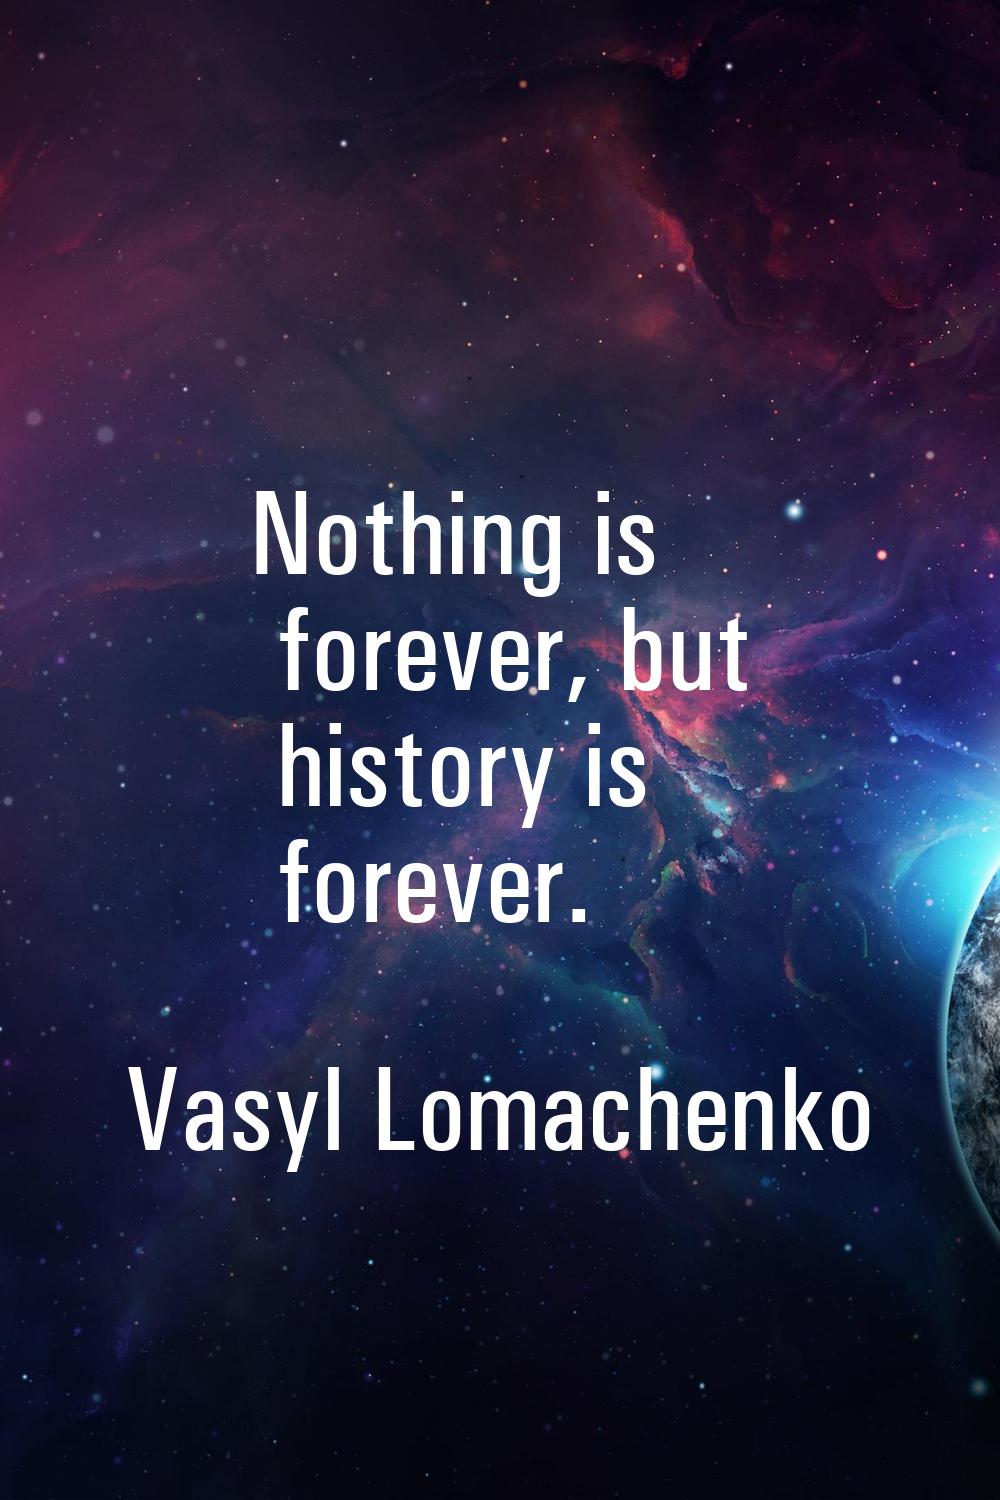 Nothing is forever, but history is forever.